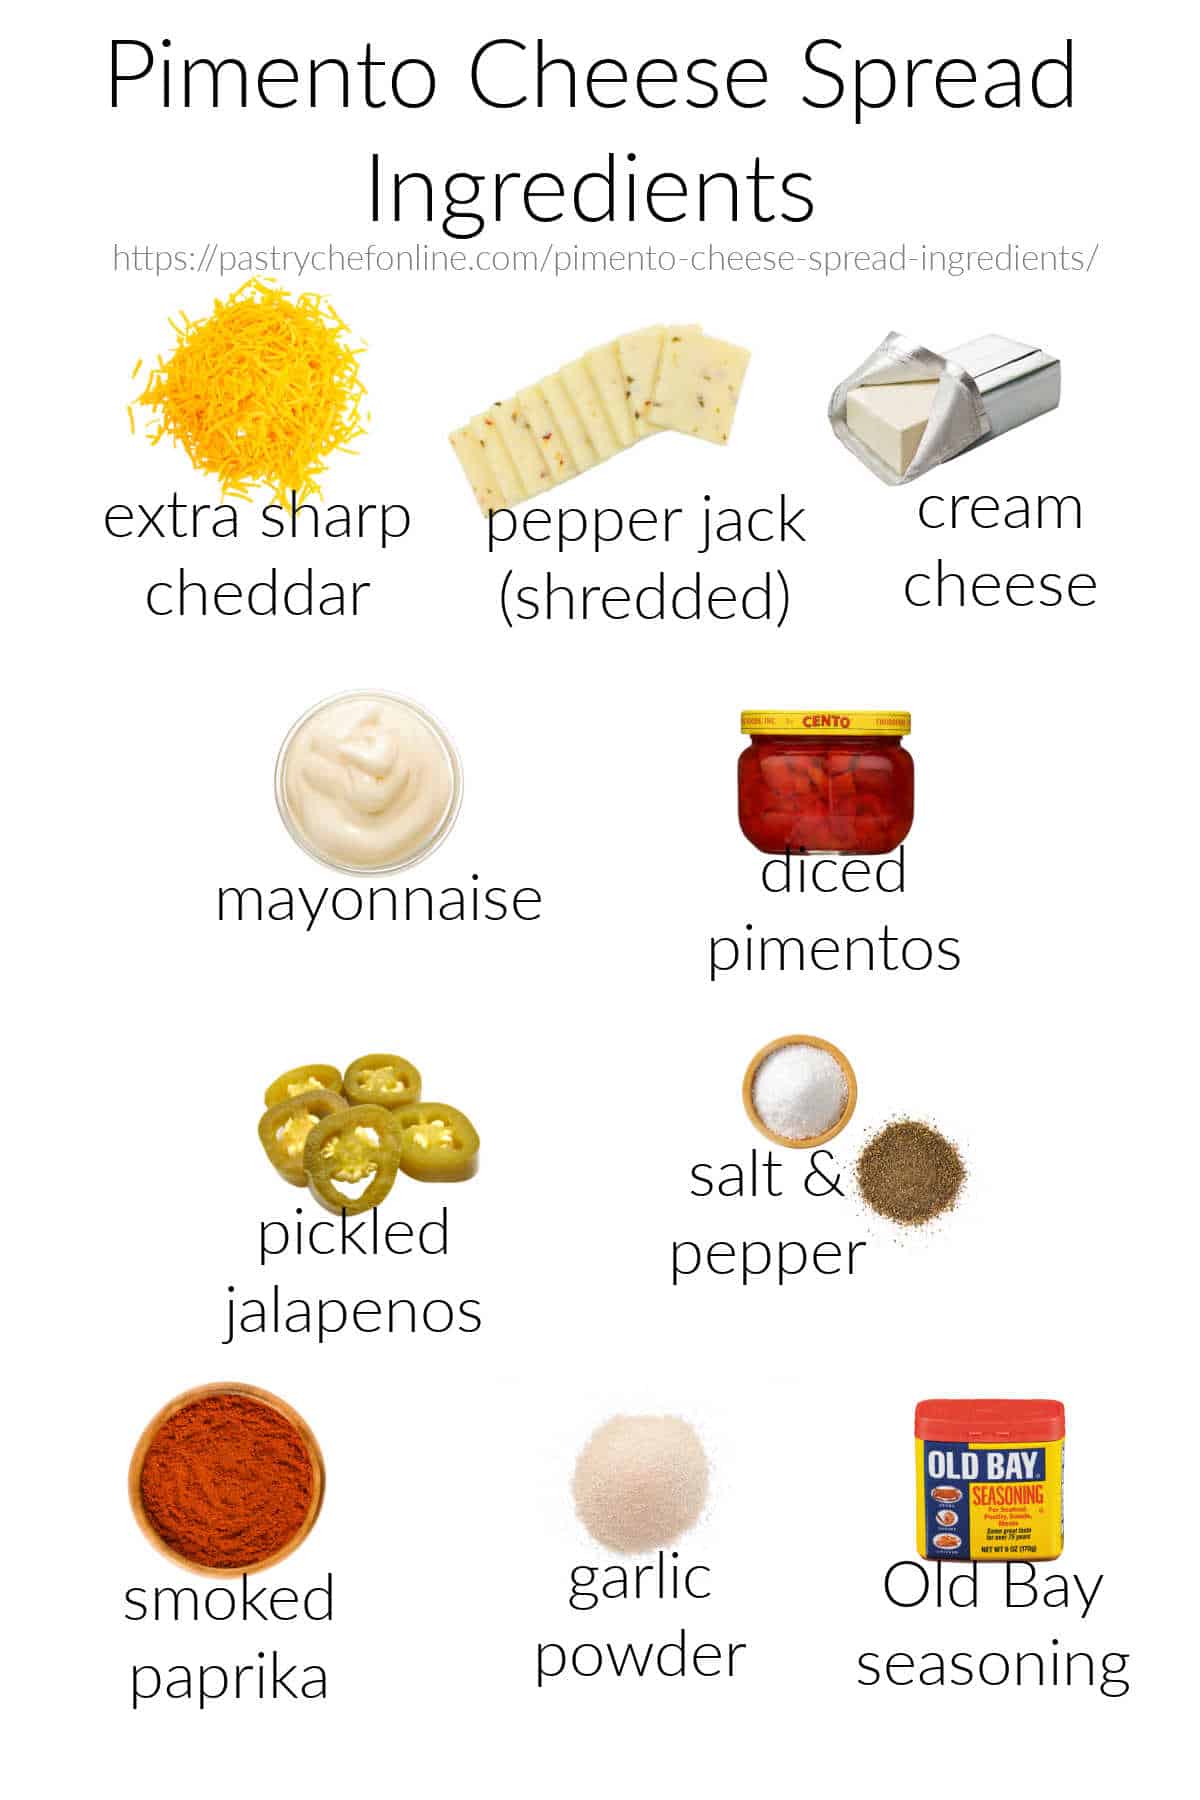 All the ingredients needed to make pimento cheese spread: sharp cheddar, pepper jack, cream cheese, mayonnaise, diced pimentos pickled jalapenos, salt & pepper, smoked paprika, garlic powder, and Old Bay seasoning.